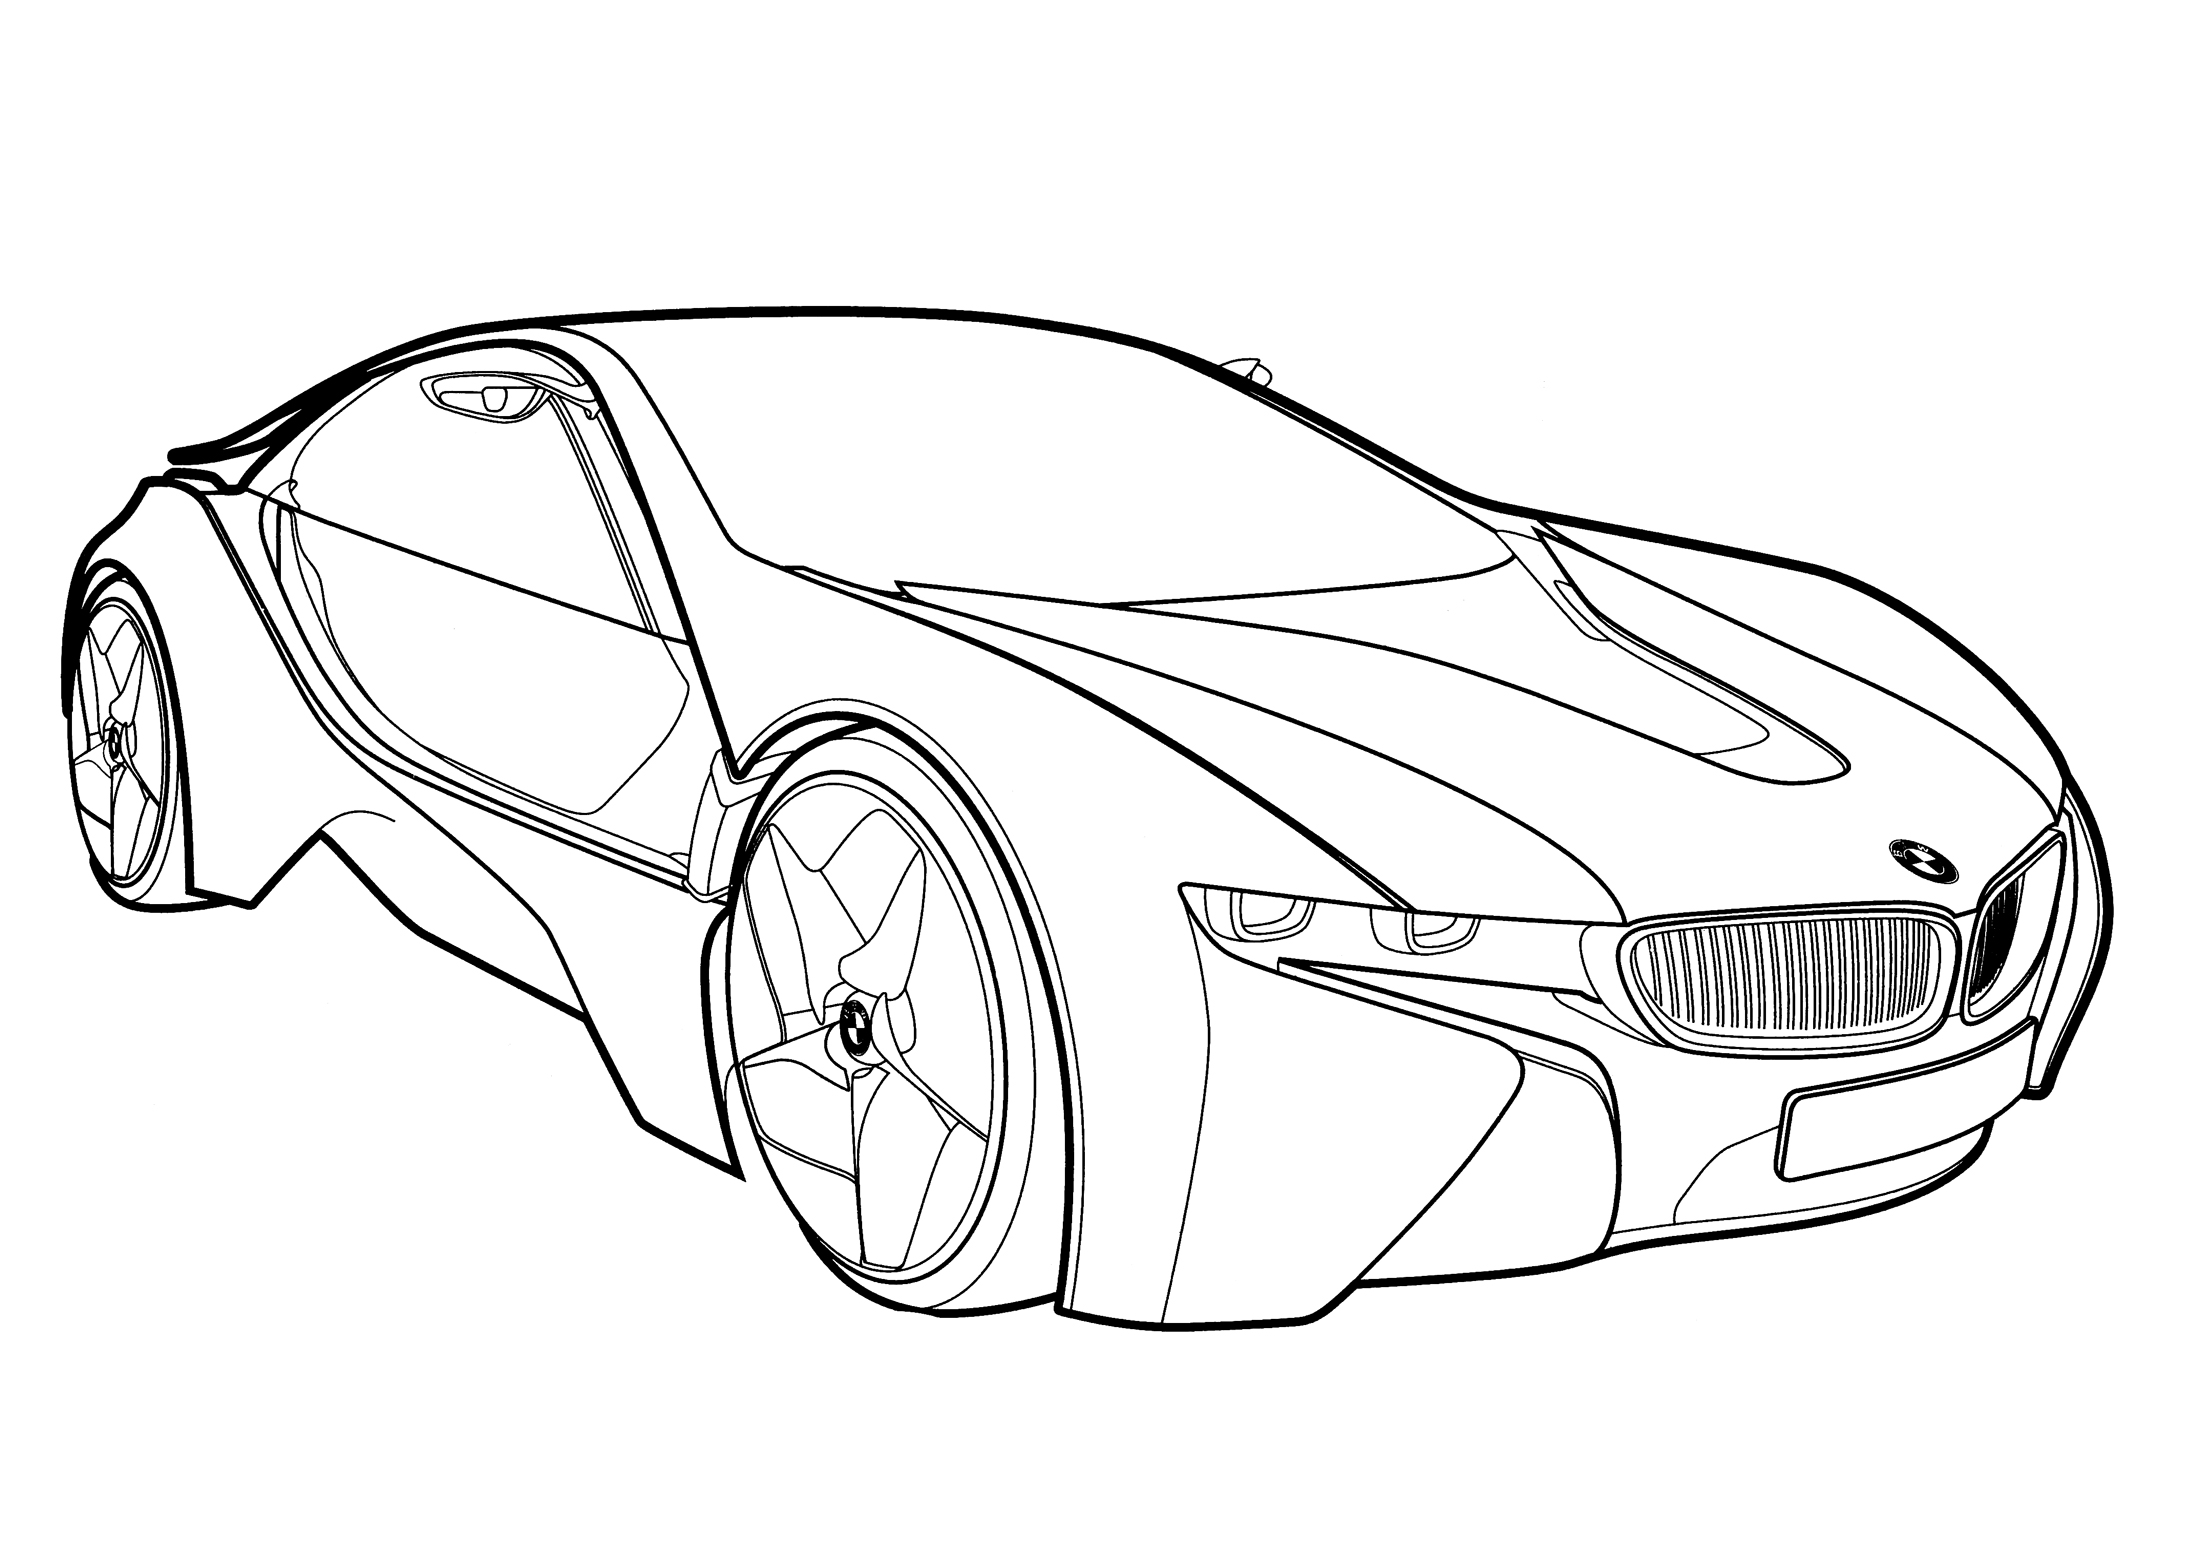 BMW Vision efficient dynamics coloring page - free and printable